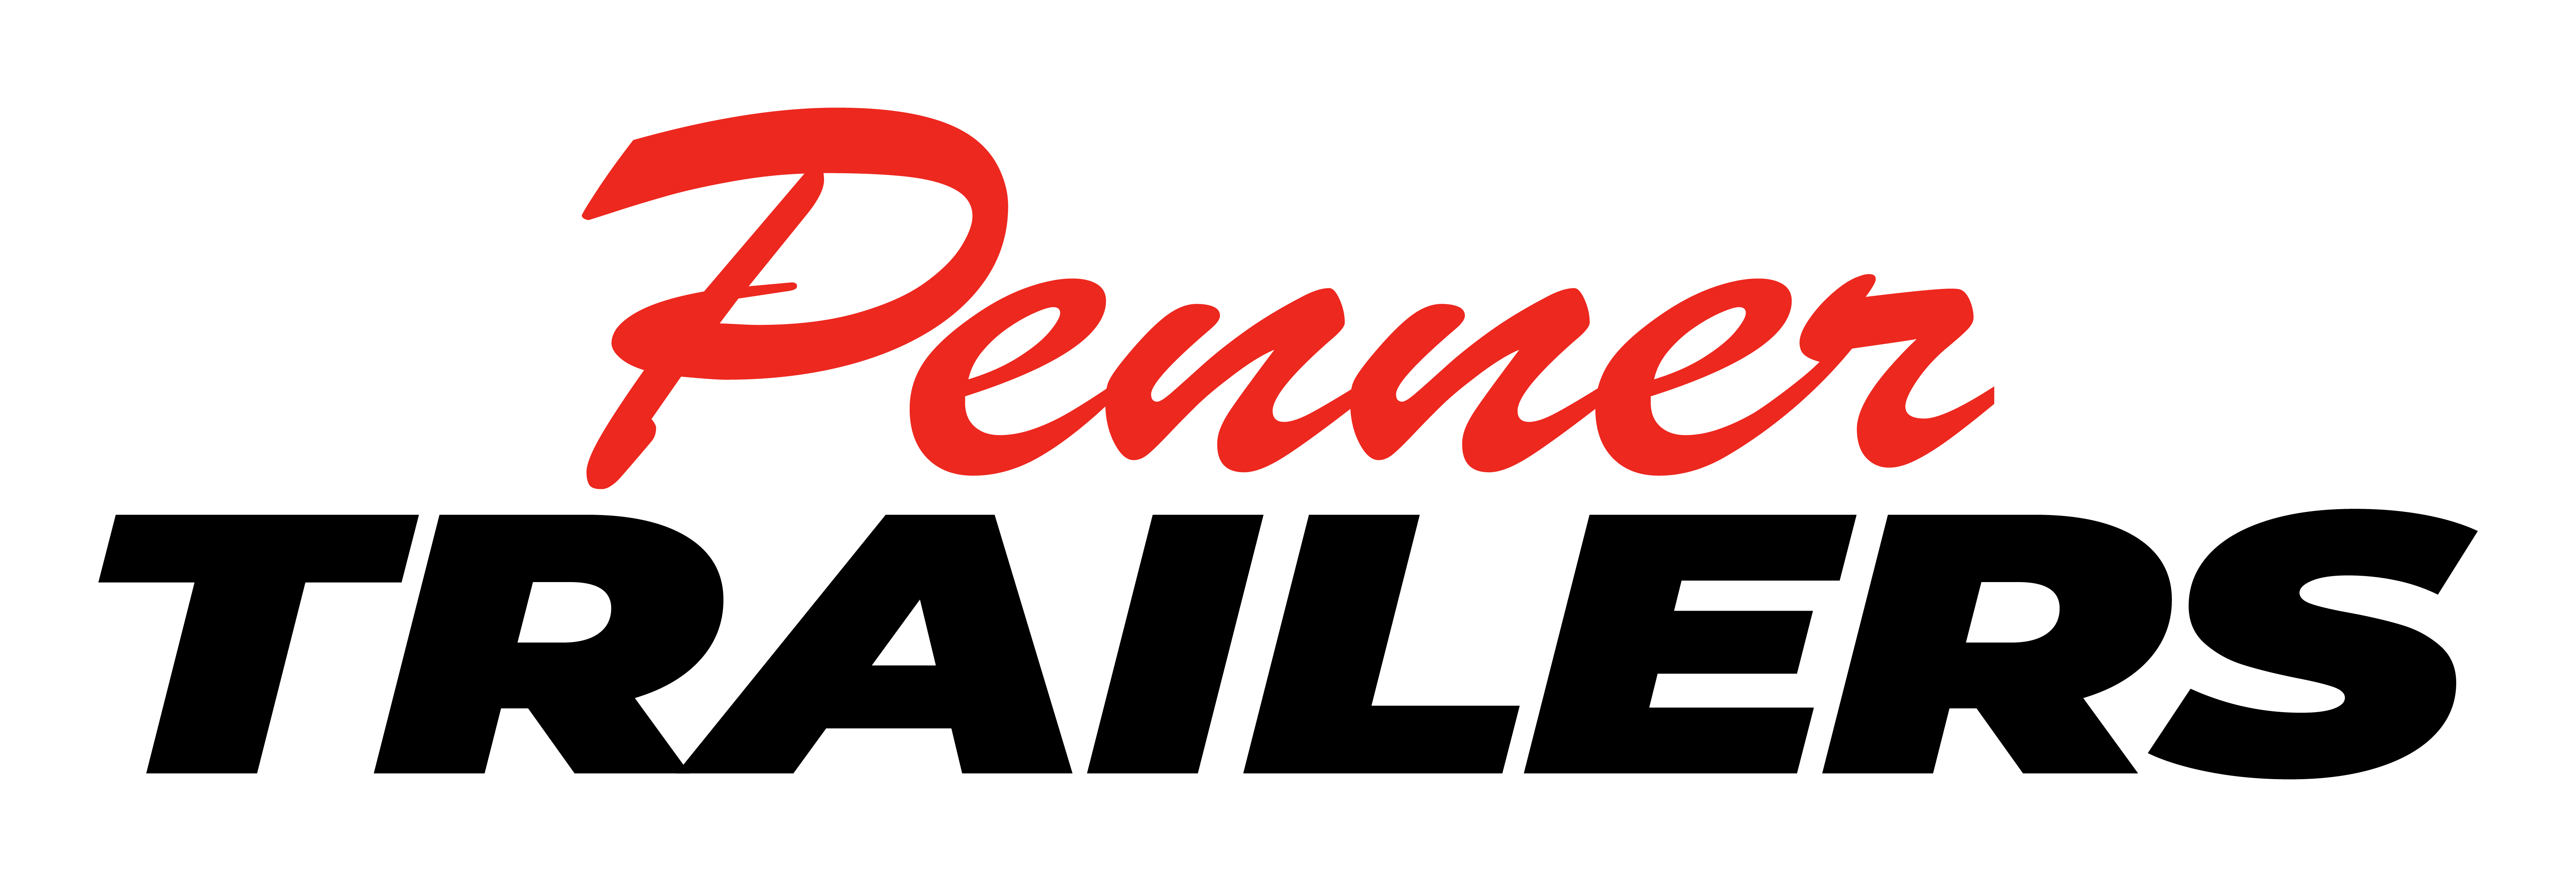 Penner Trailers Logo - "penner" in red cursive and "trailers" in black bold italic font